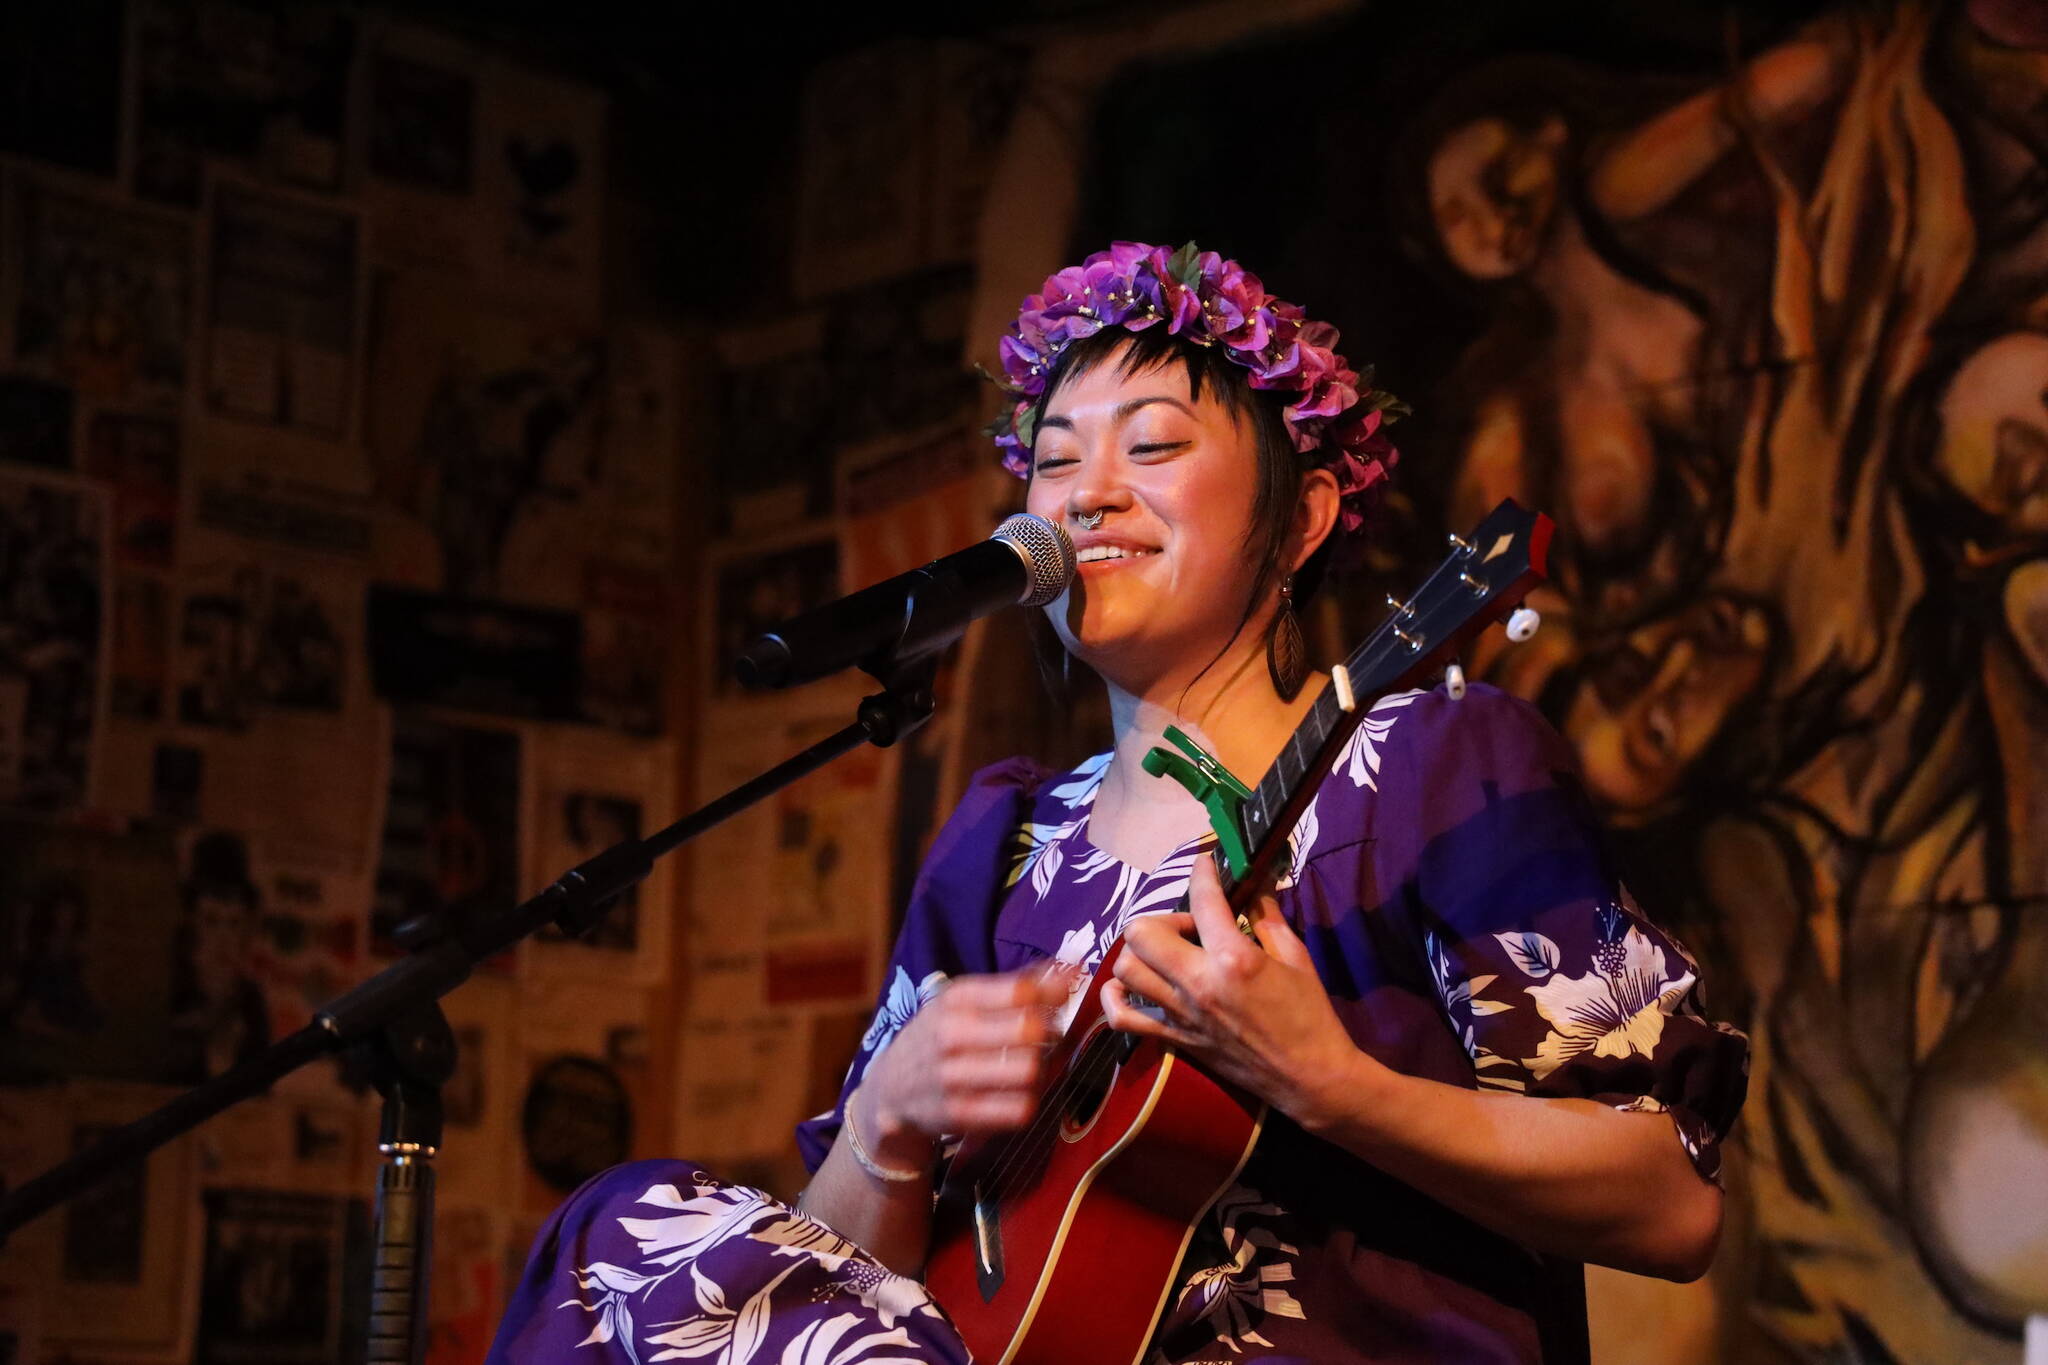 Lisa Puananimōhala’ikalani Denny sings while on stage at the Alaskan Hotel and Bar during the Alaska Folk Festival side-stage event “Unceded” Tuesday evening. (Clarise Larson / Juneau Empire)